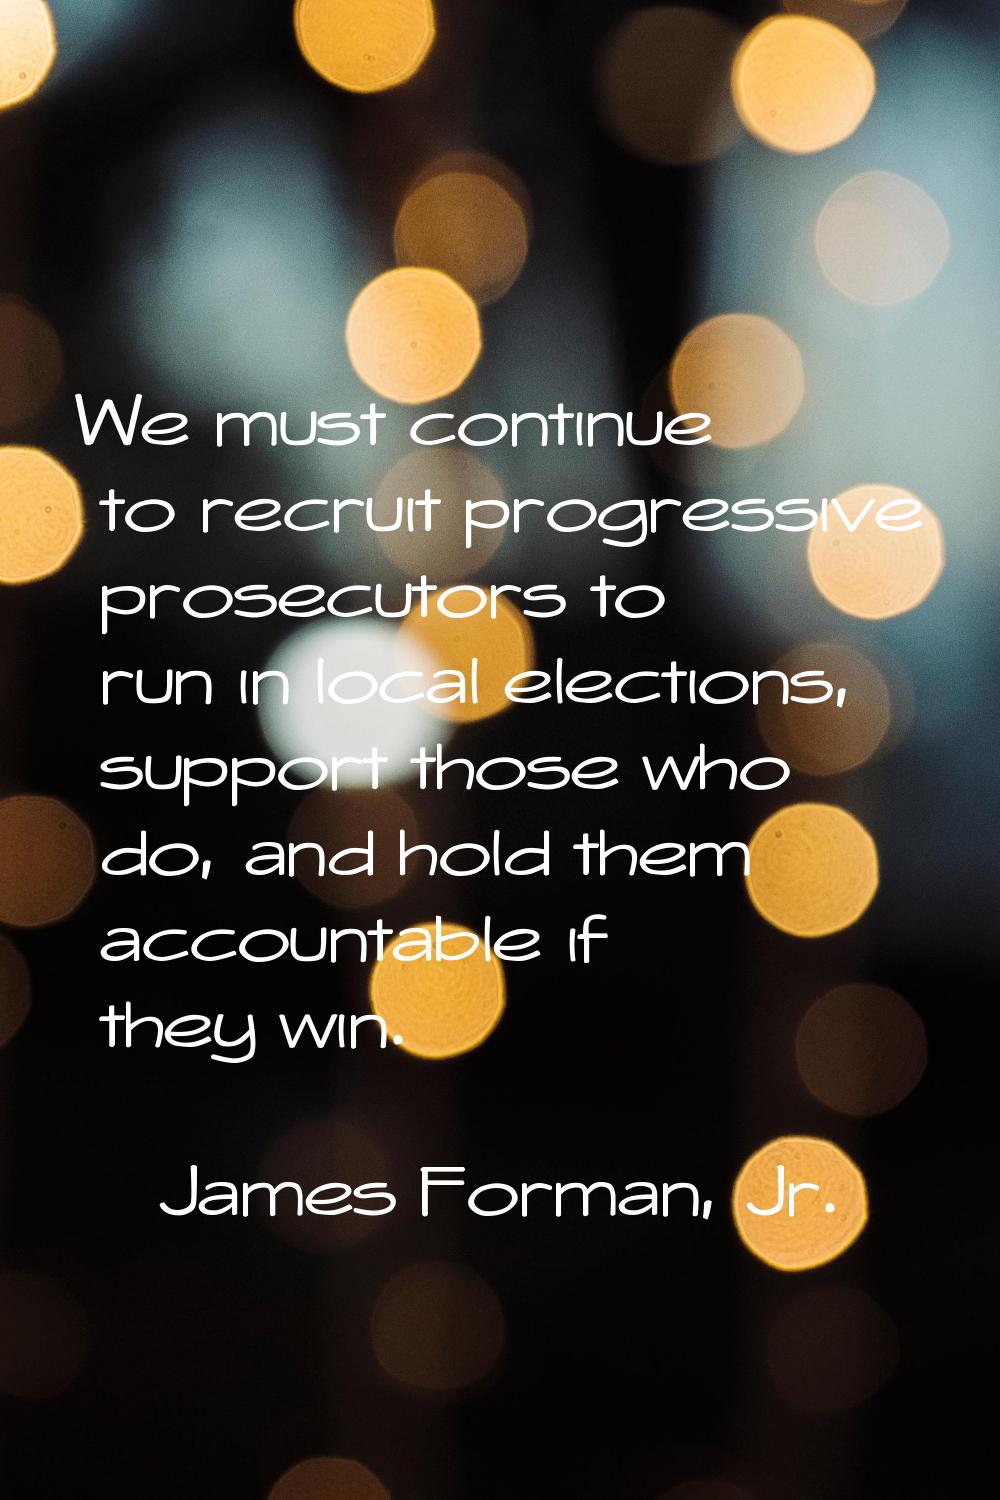 We must continue to recruit progressive prosecutors to run in local elections, support those who do